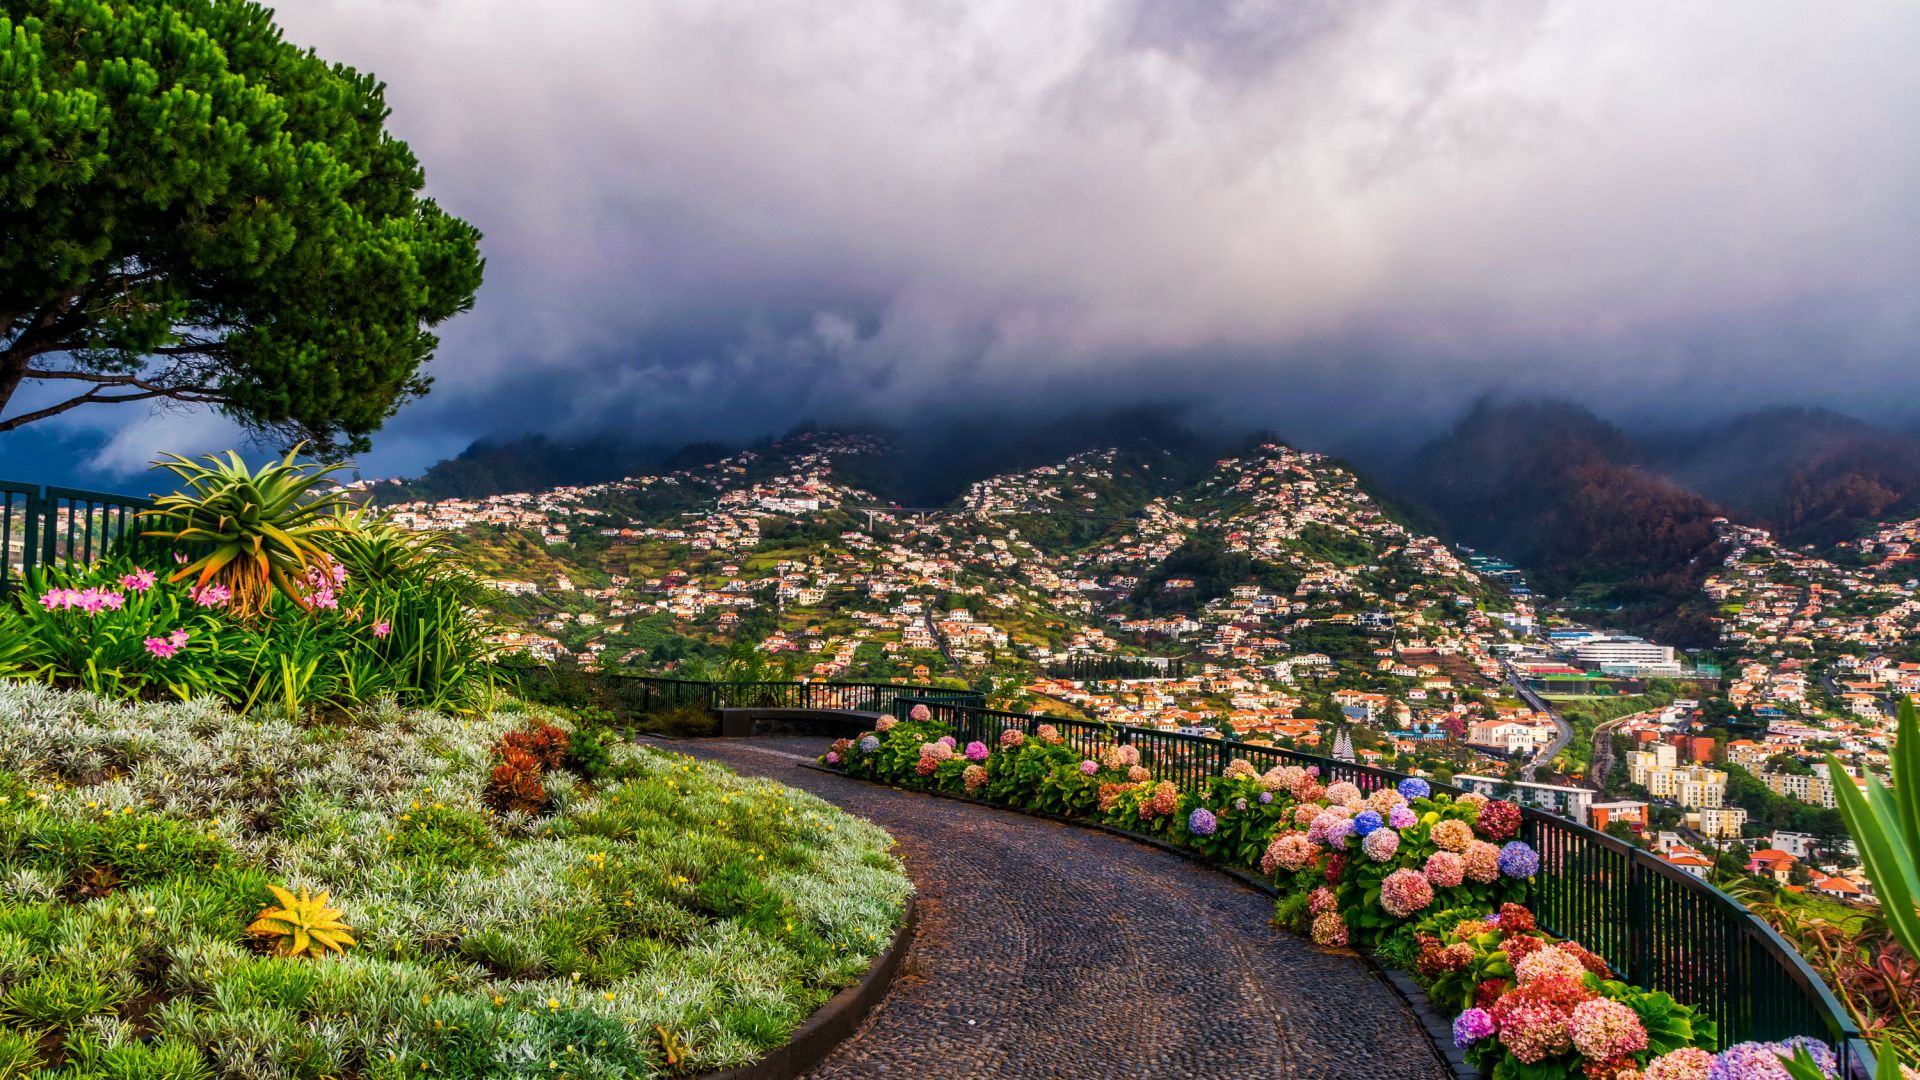 Desktop Wallpaper Madeira, City, Hill Station, Town, Mountains, Clouds,  Flowers, Hd Image, Picture, Background, Cbd20b